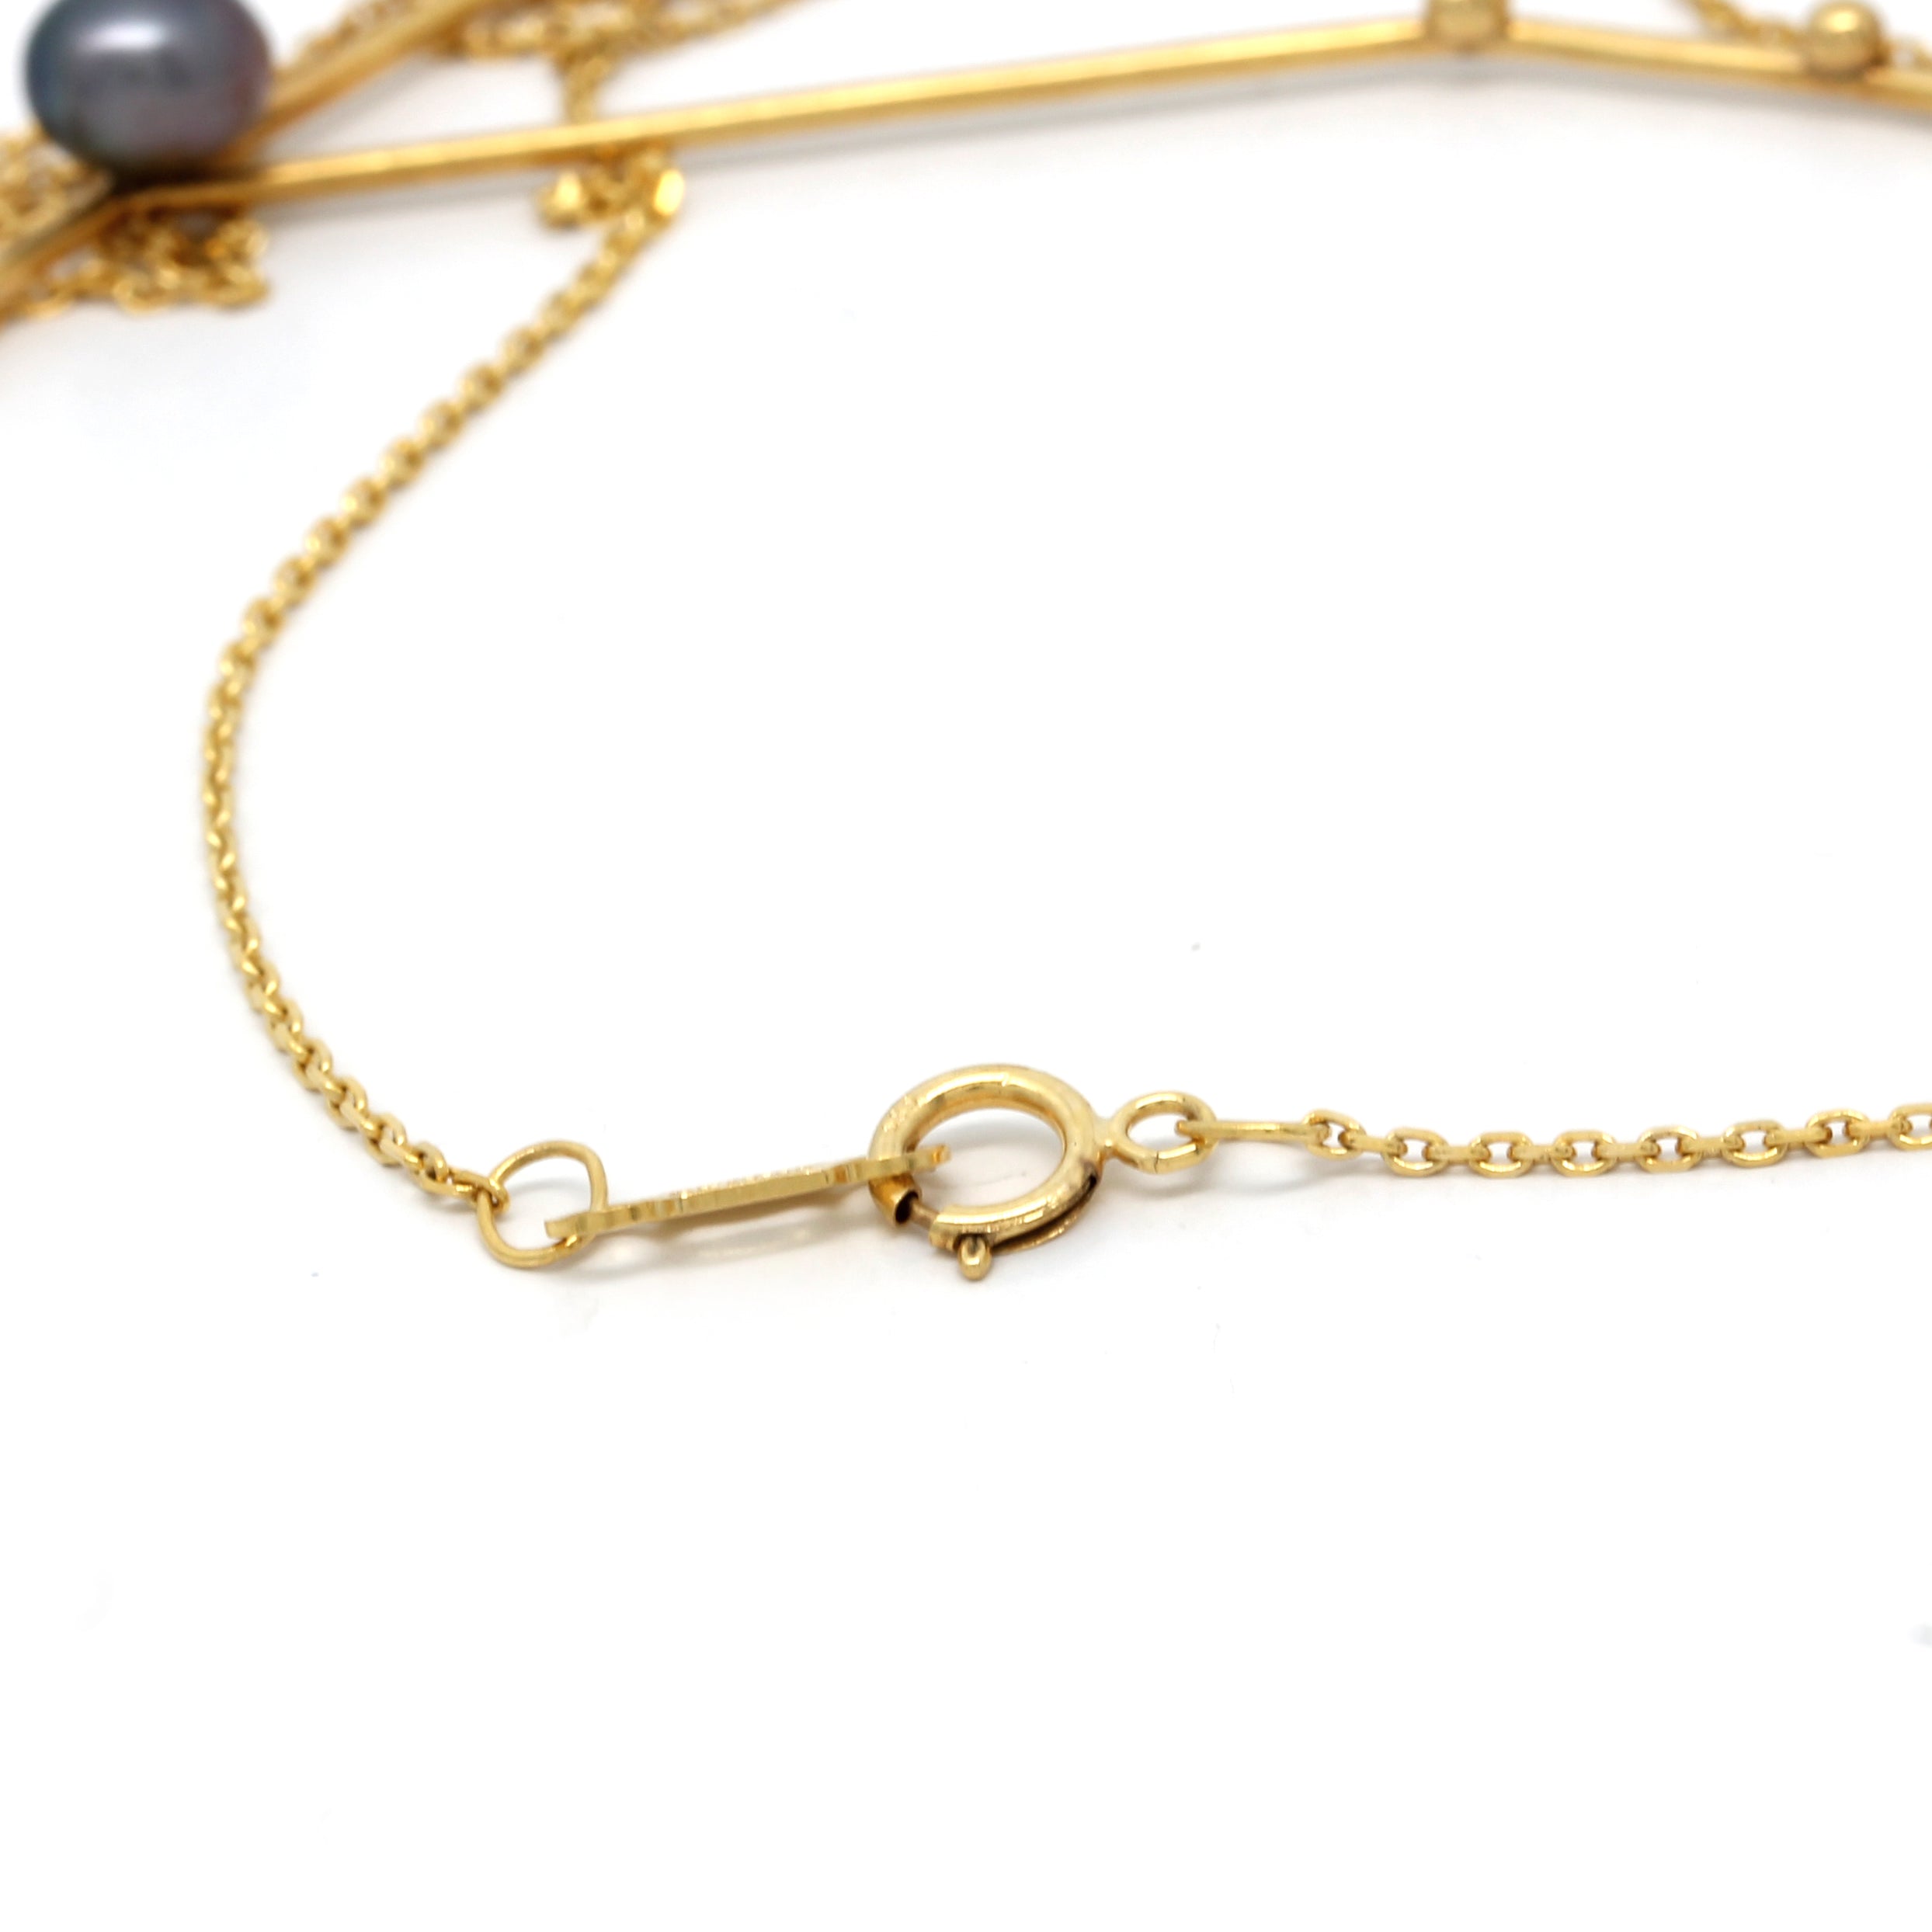 "Capricorn (Dec 22th - Jan 19th)" 14K Yellow Gold Pendant and Chain with Cortez Keshi Pearls